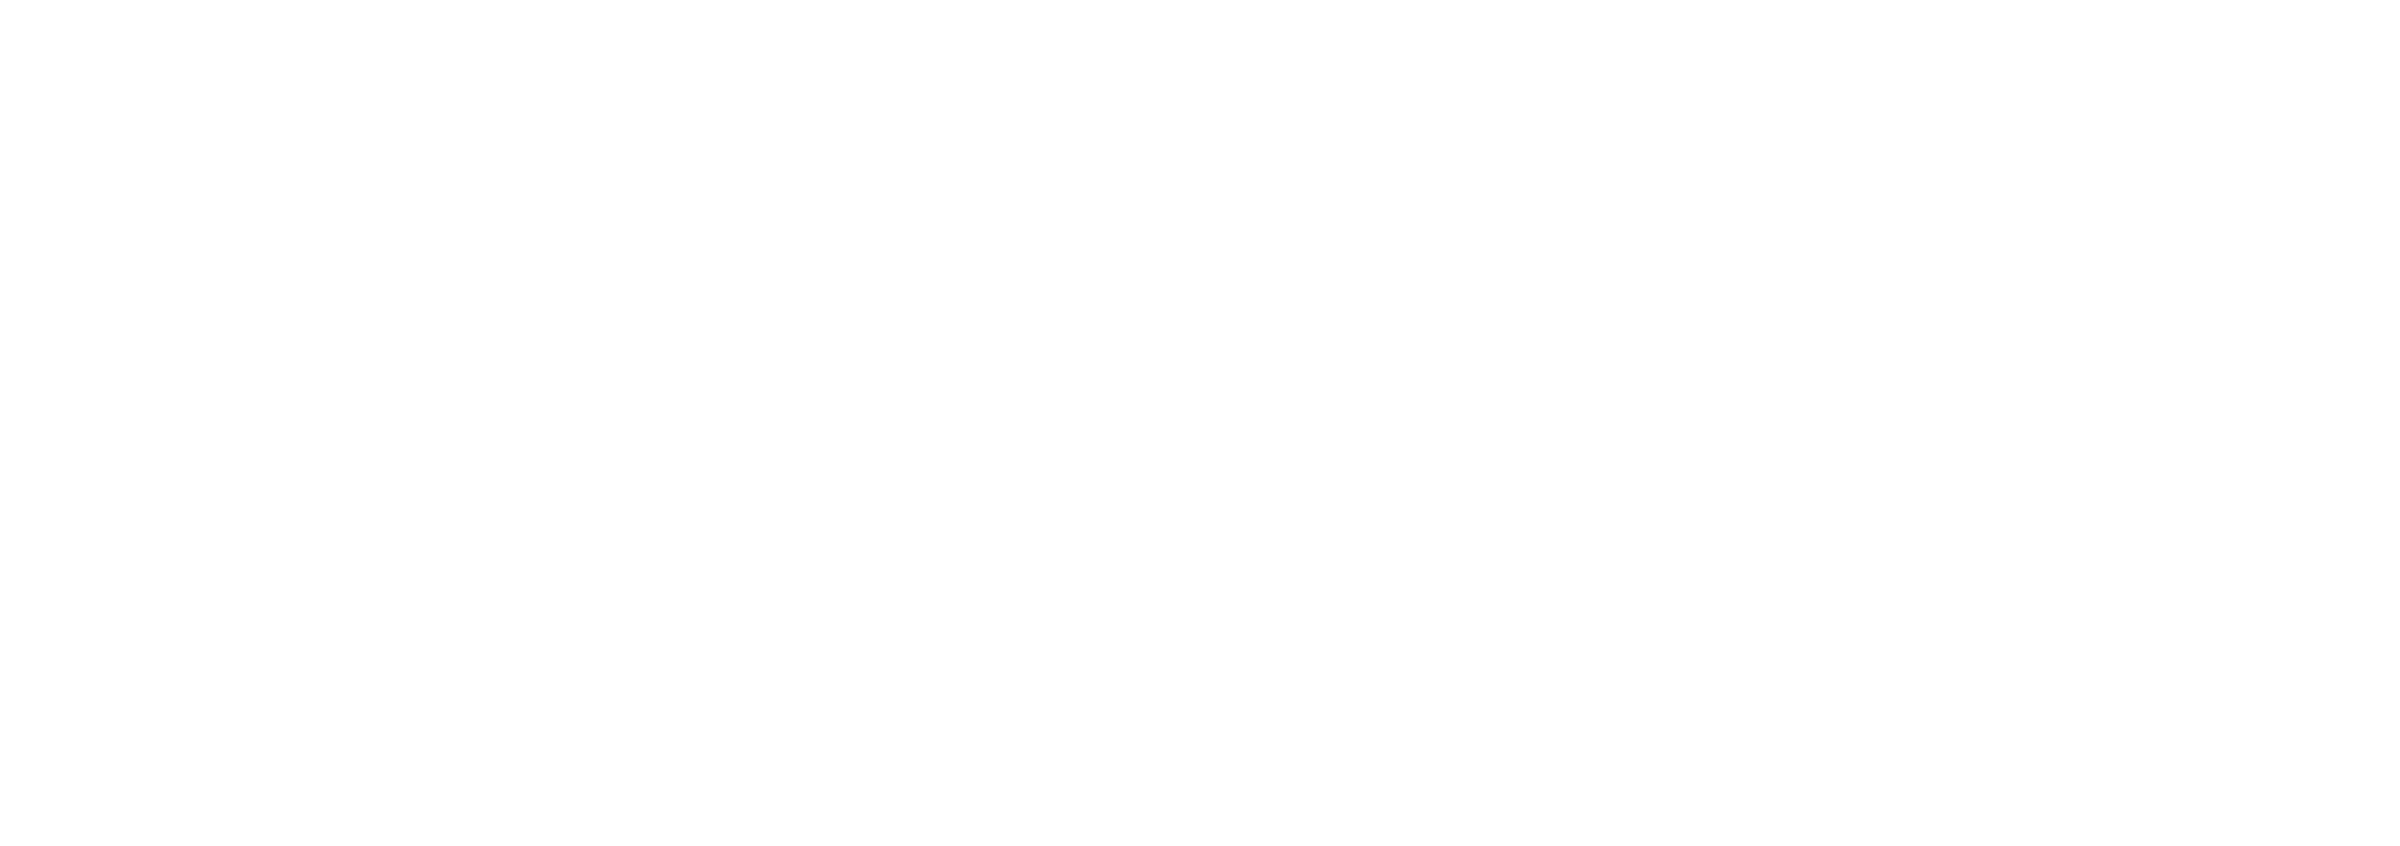 USmax Corporation logo in white only